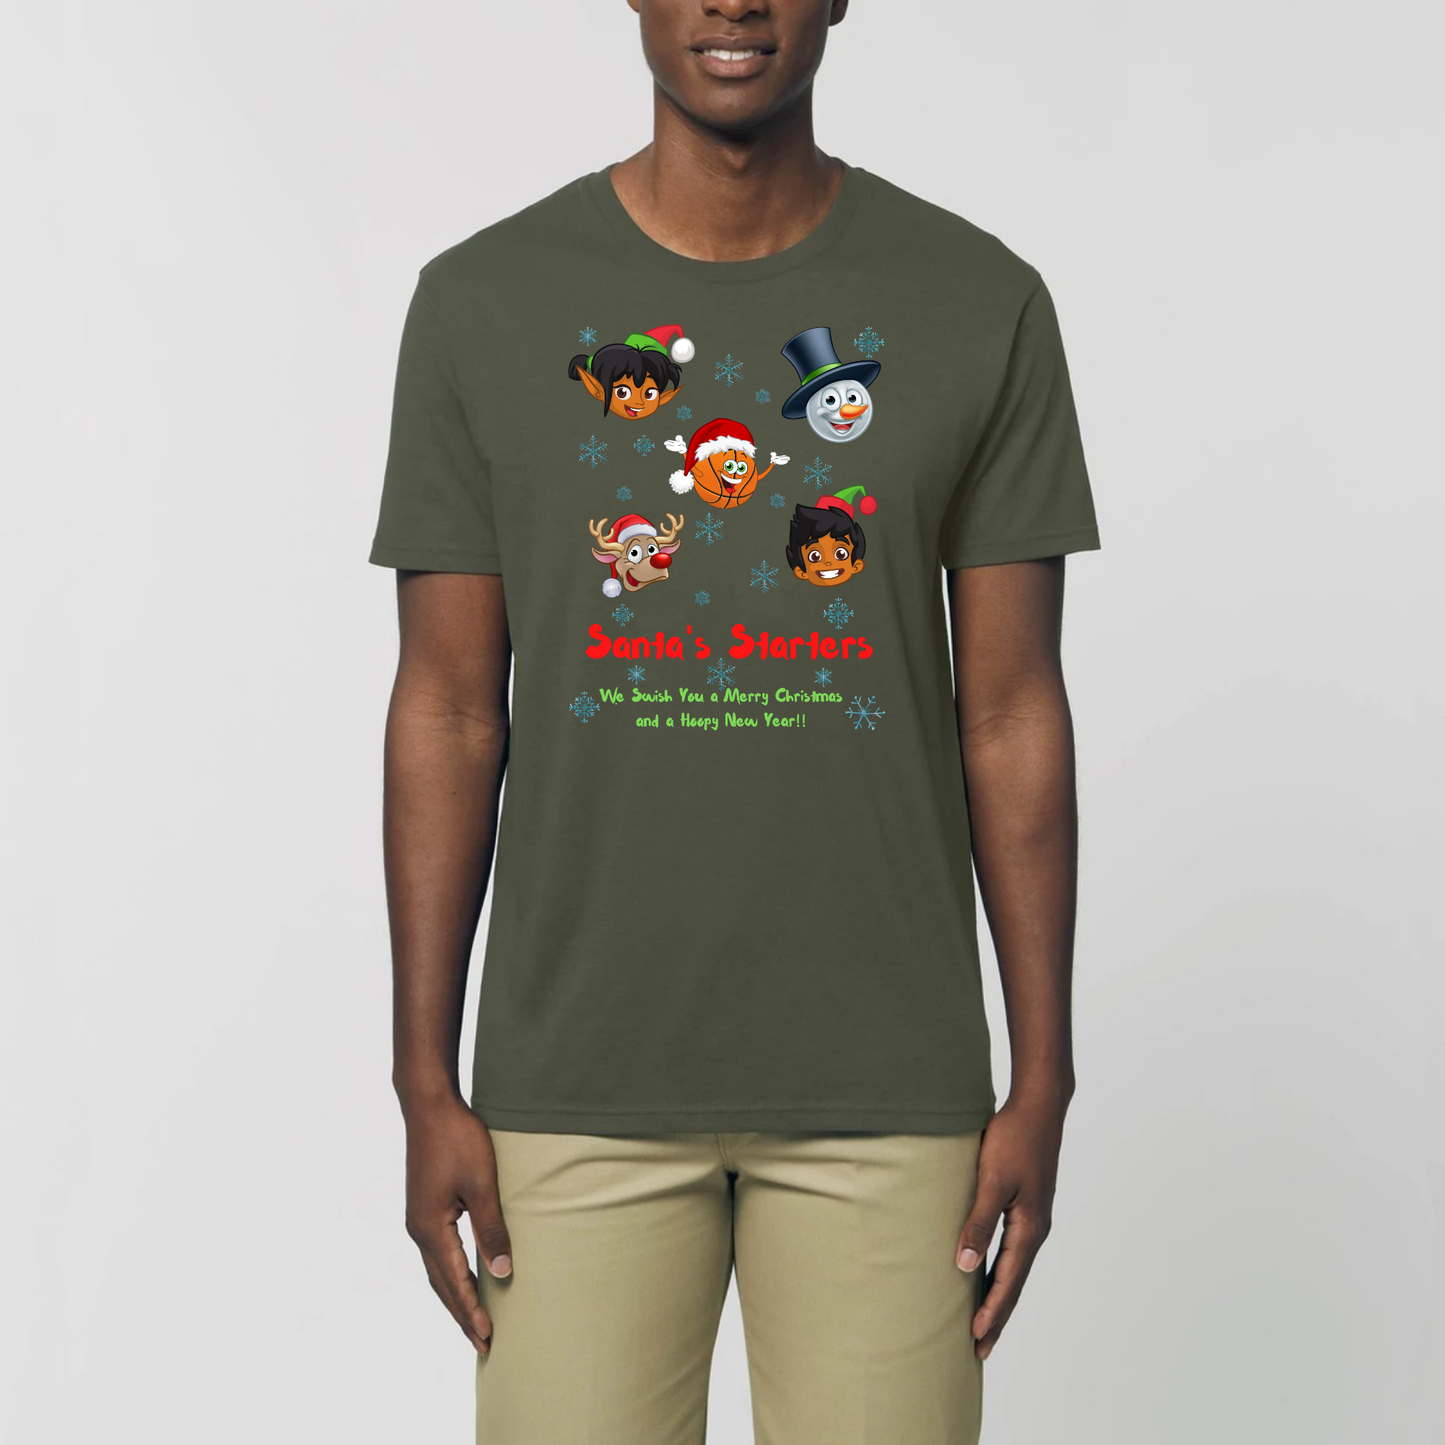 Model wearing a basketball themed Christmas t-shirt with a print design, The design features 5 cartoon character heads of 2 elves, a snowman, Rudolf and a basketball head with the heading Santa's Starters and sub heading We swish you a Merry Christmas and a Hoopy New Year. The t-shirt is Khaki